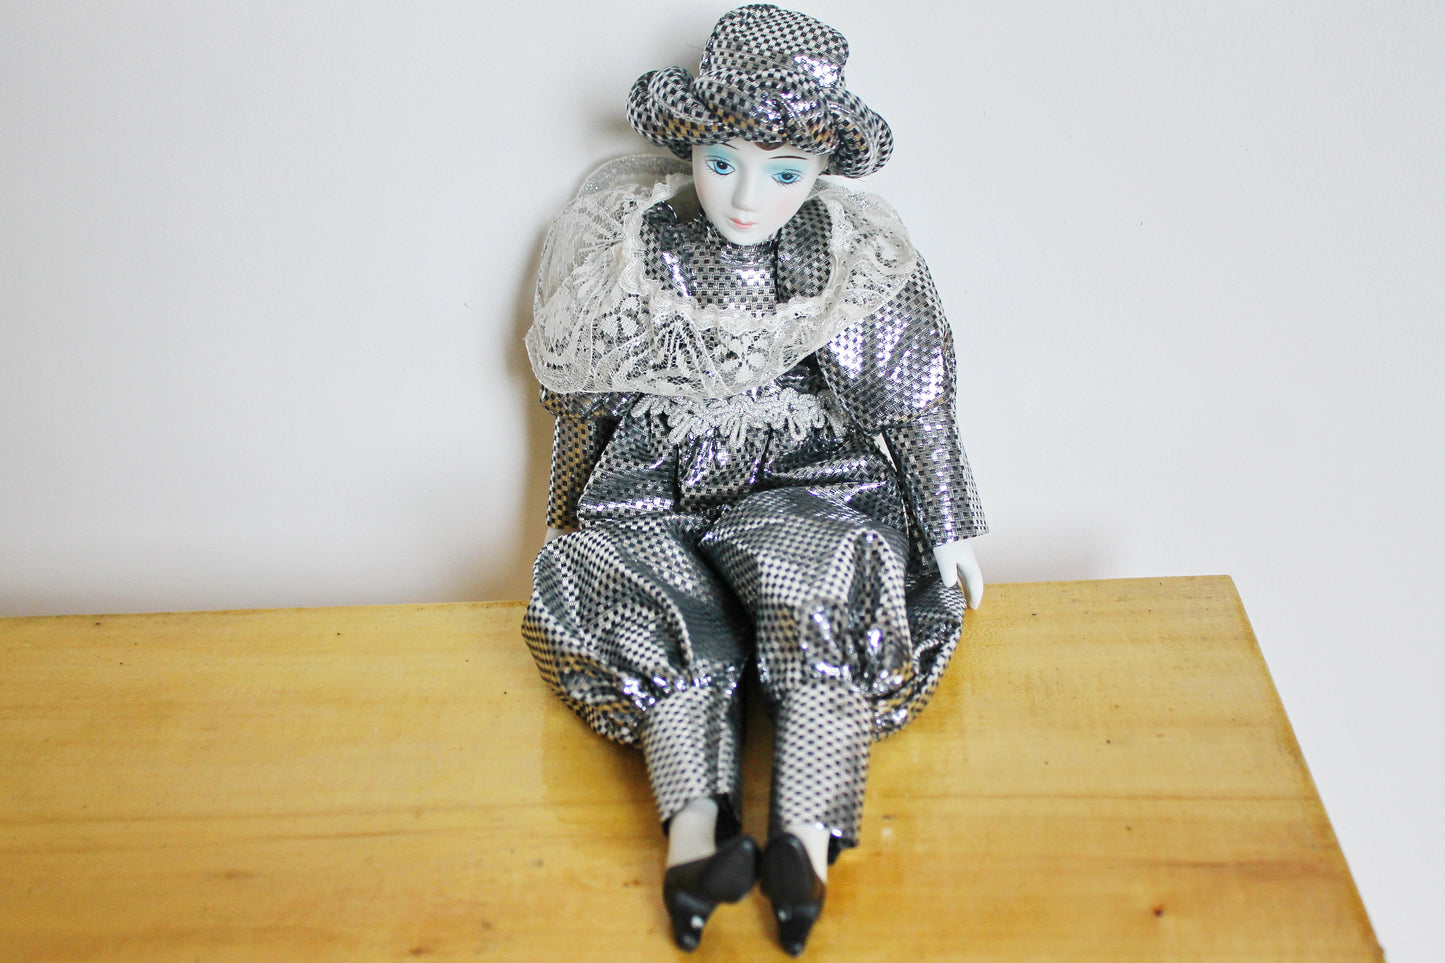 Vintage porcelain Venetian doll - Harlequin in a turban - 15.4 inches- collectible doll - porcelain doll - decor doll - 1980s